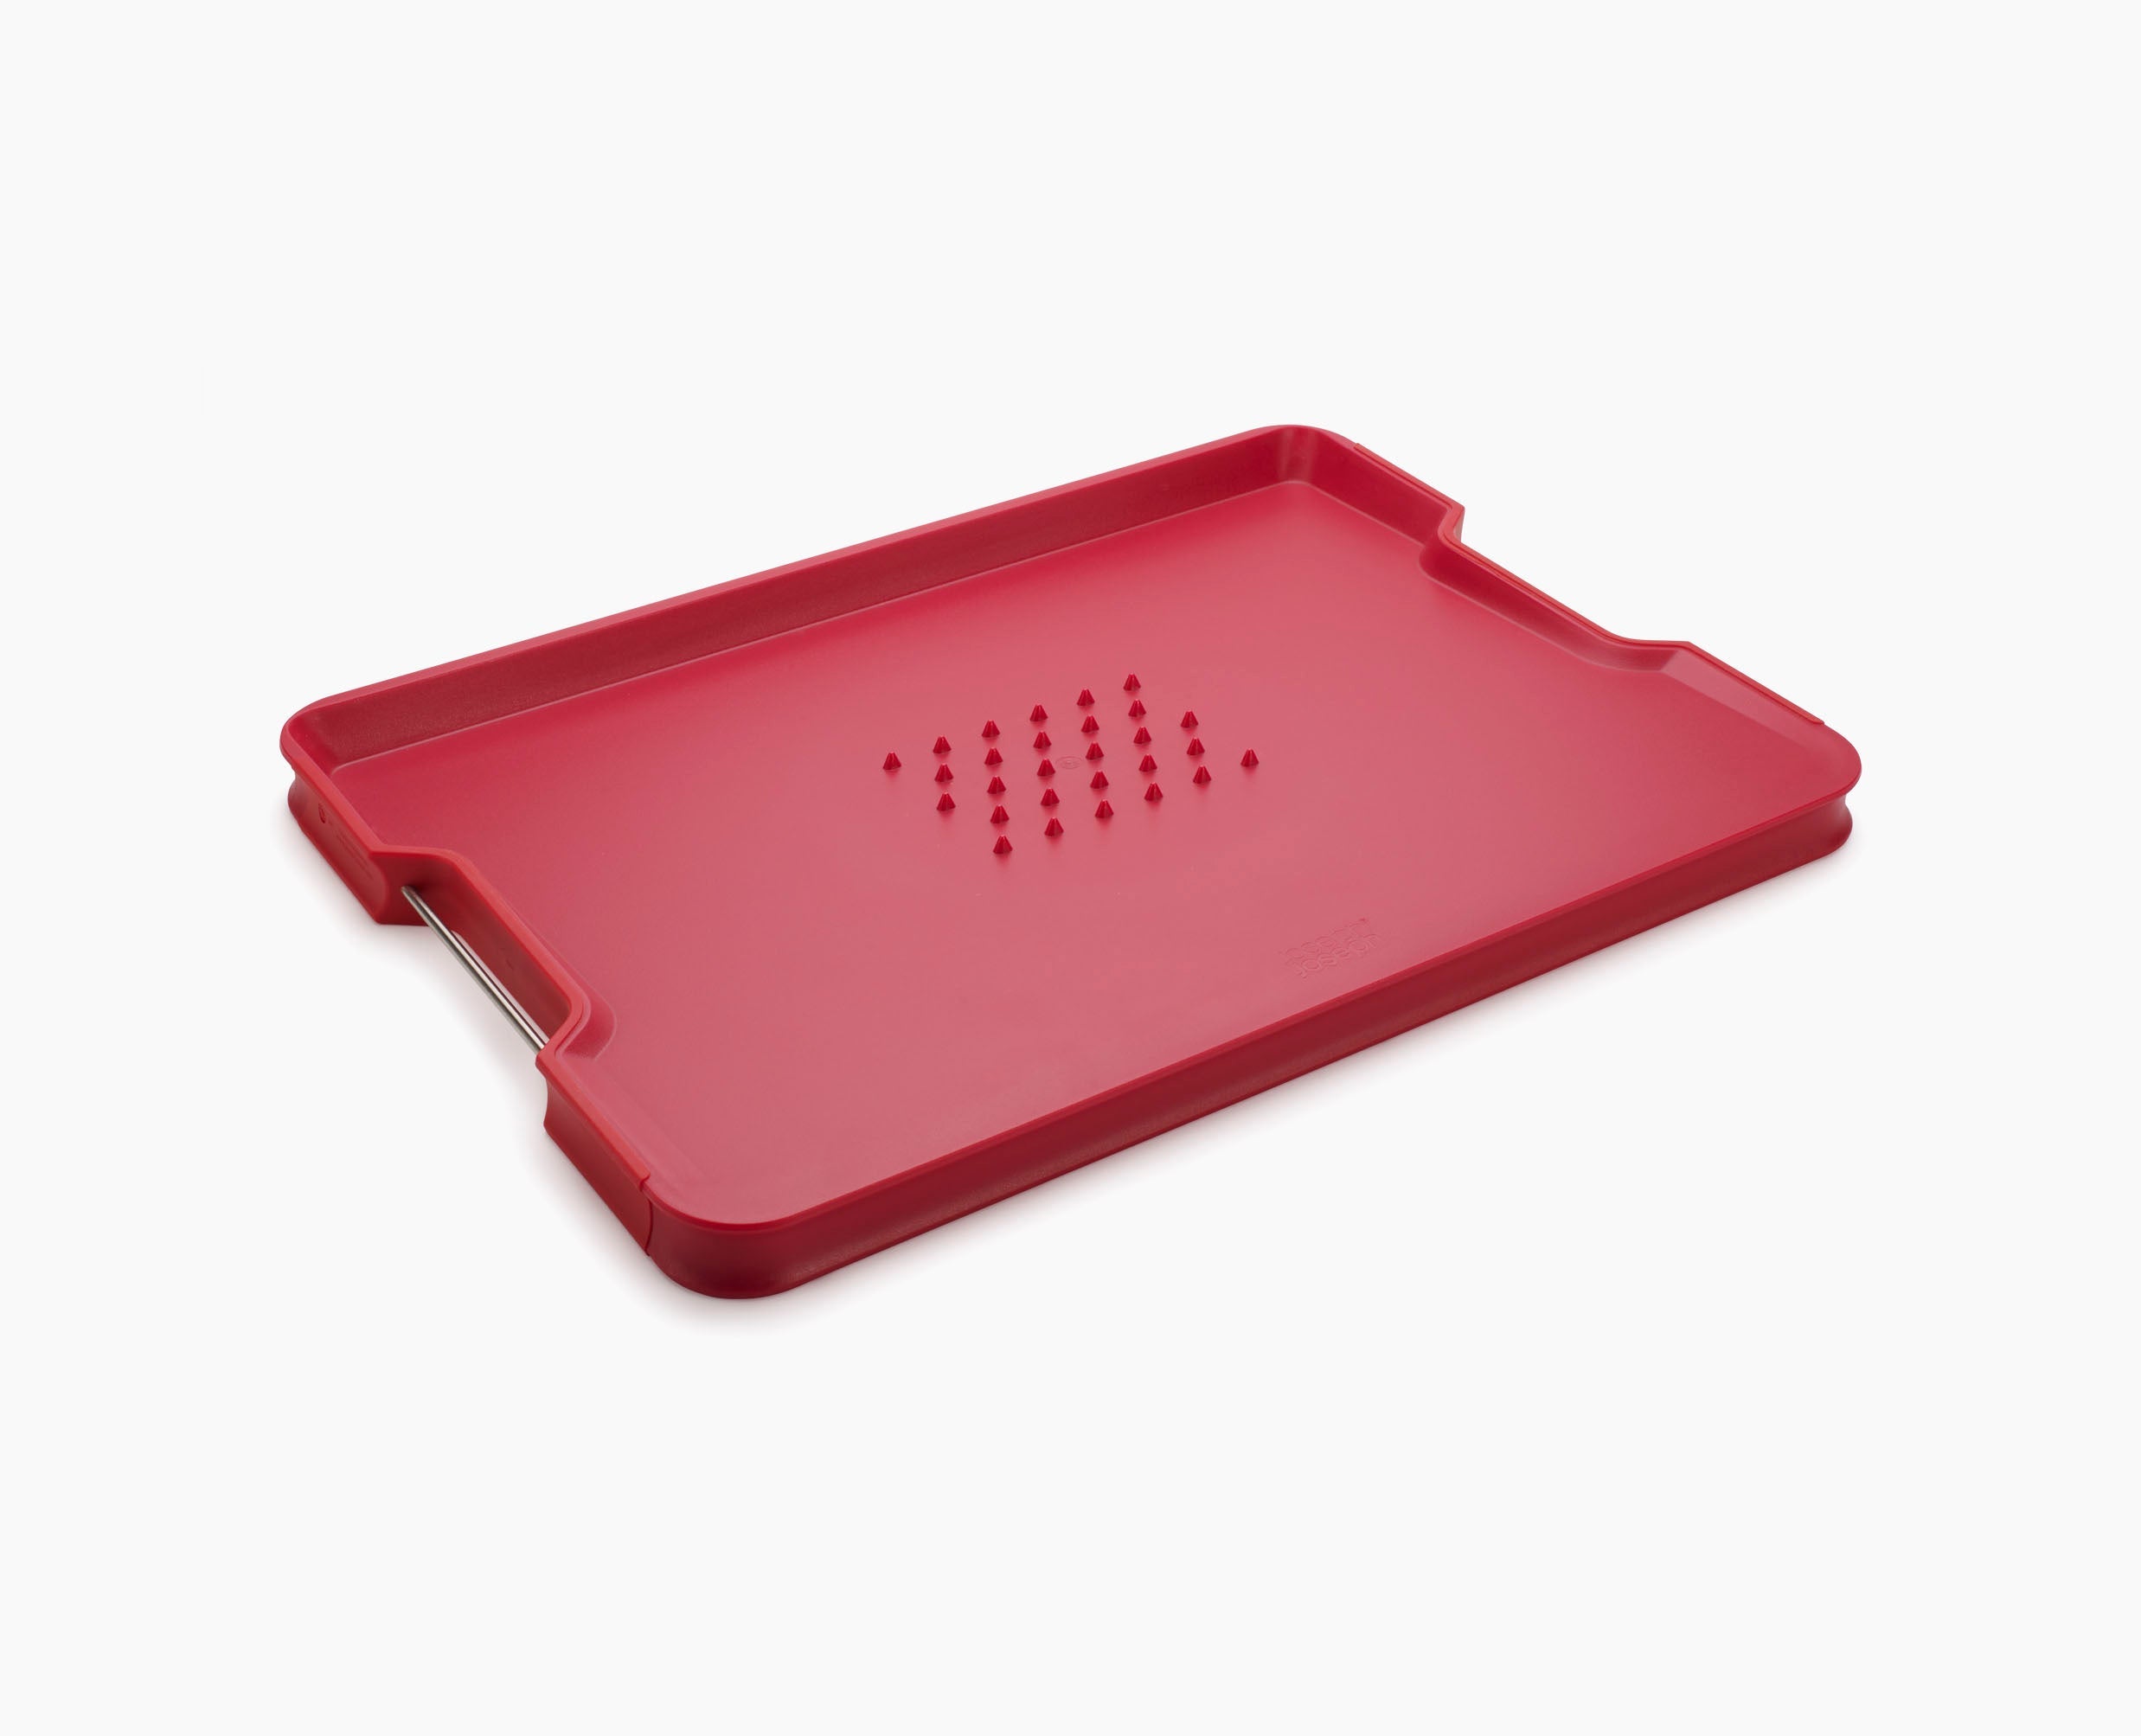  3/4 Red Poly Cutting Board - A Cut Above the Rest!